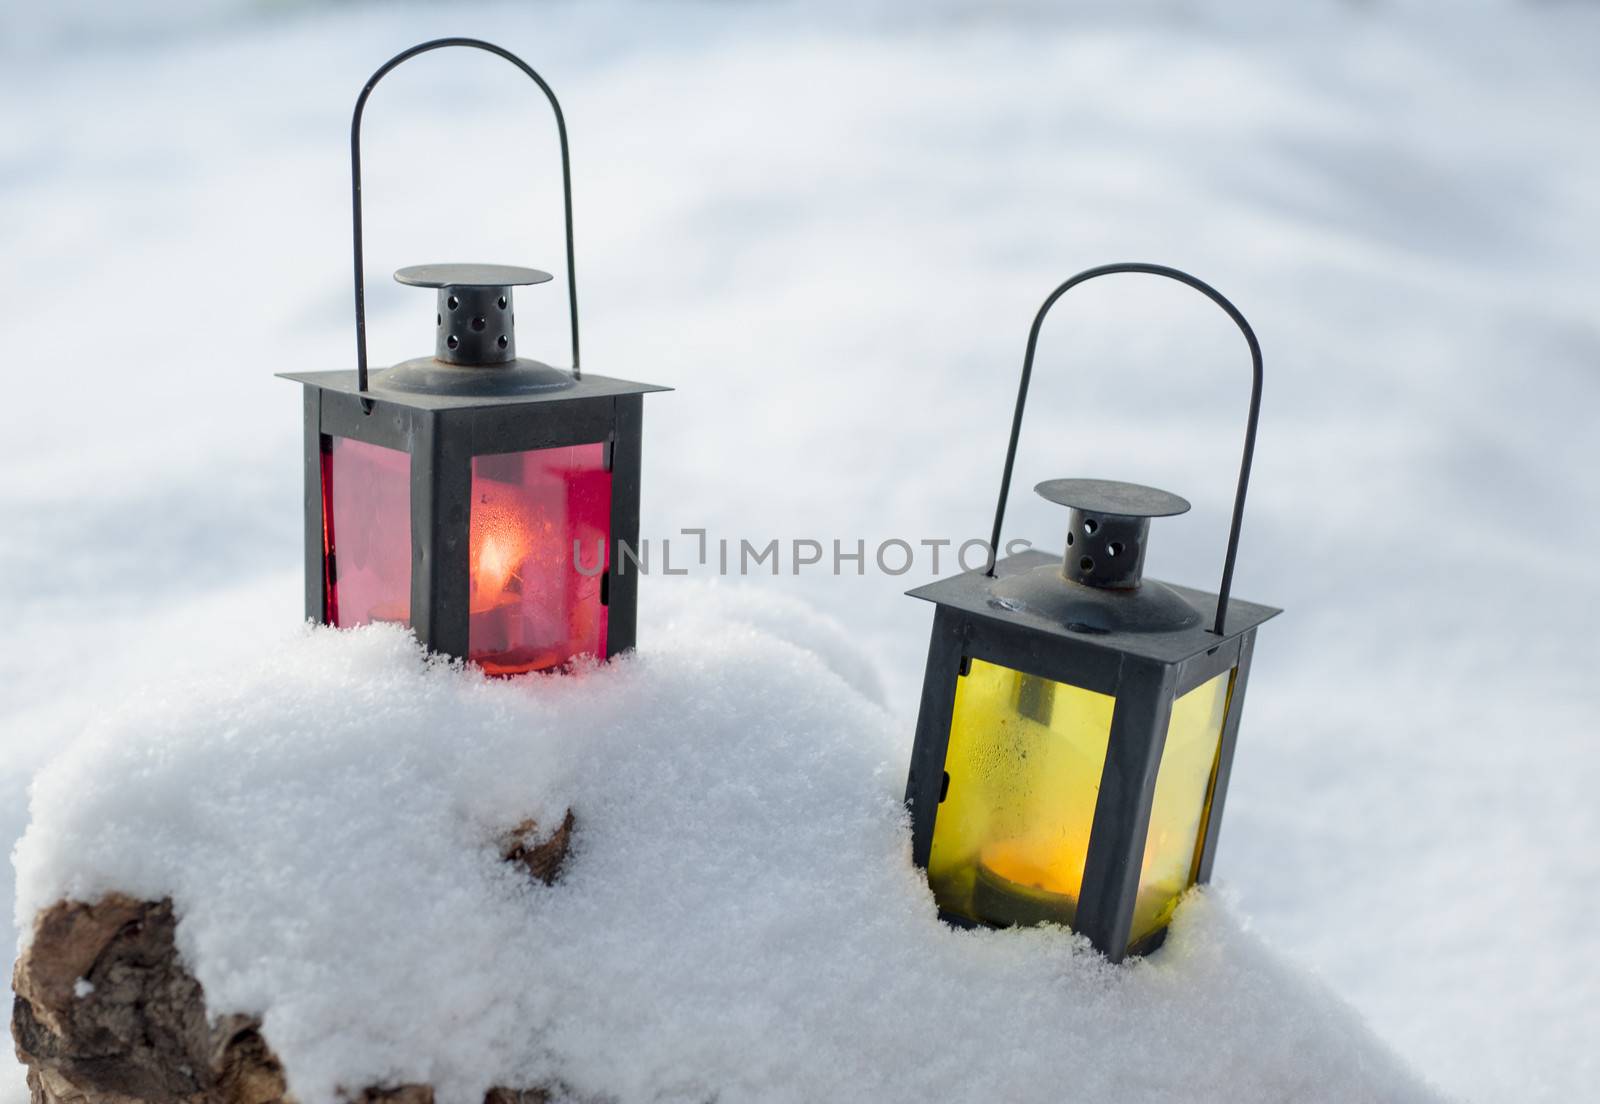 Lamps on snow by Alenmax